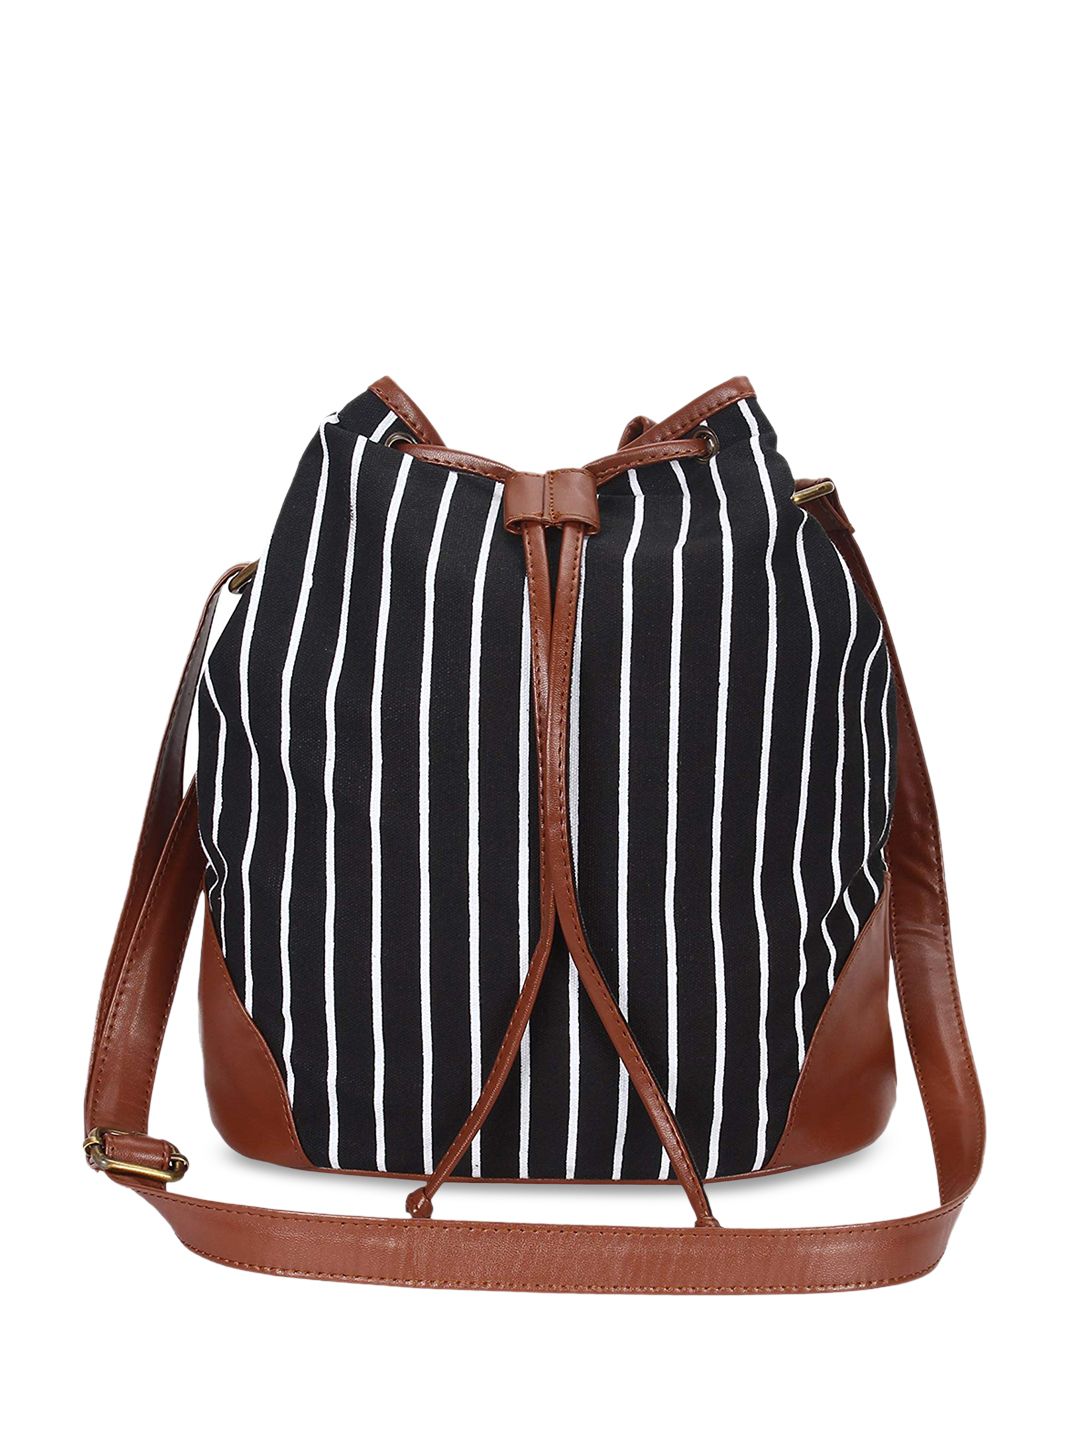 Lychee bags Black & White Striped Sling Bag Price in India